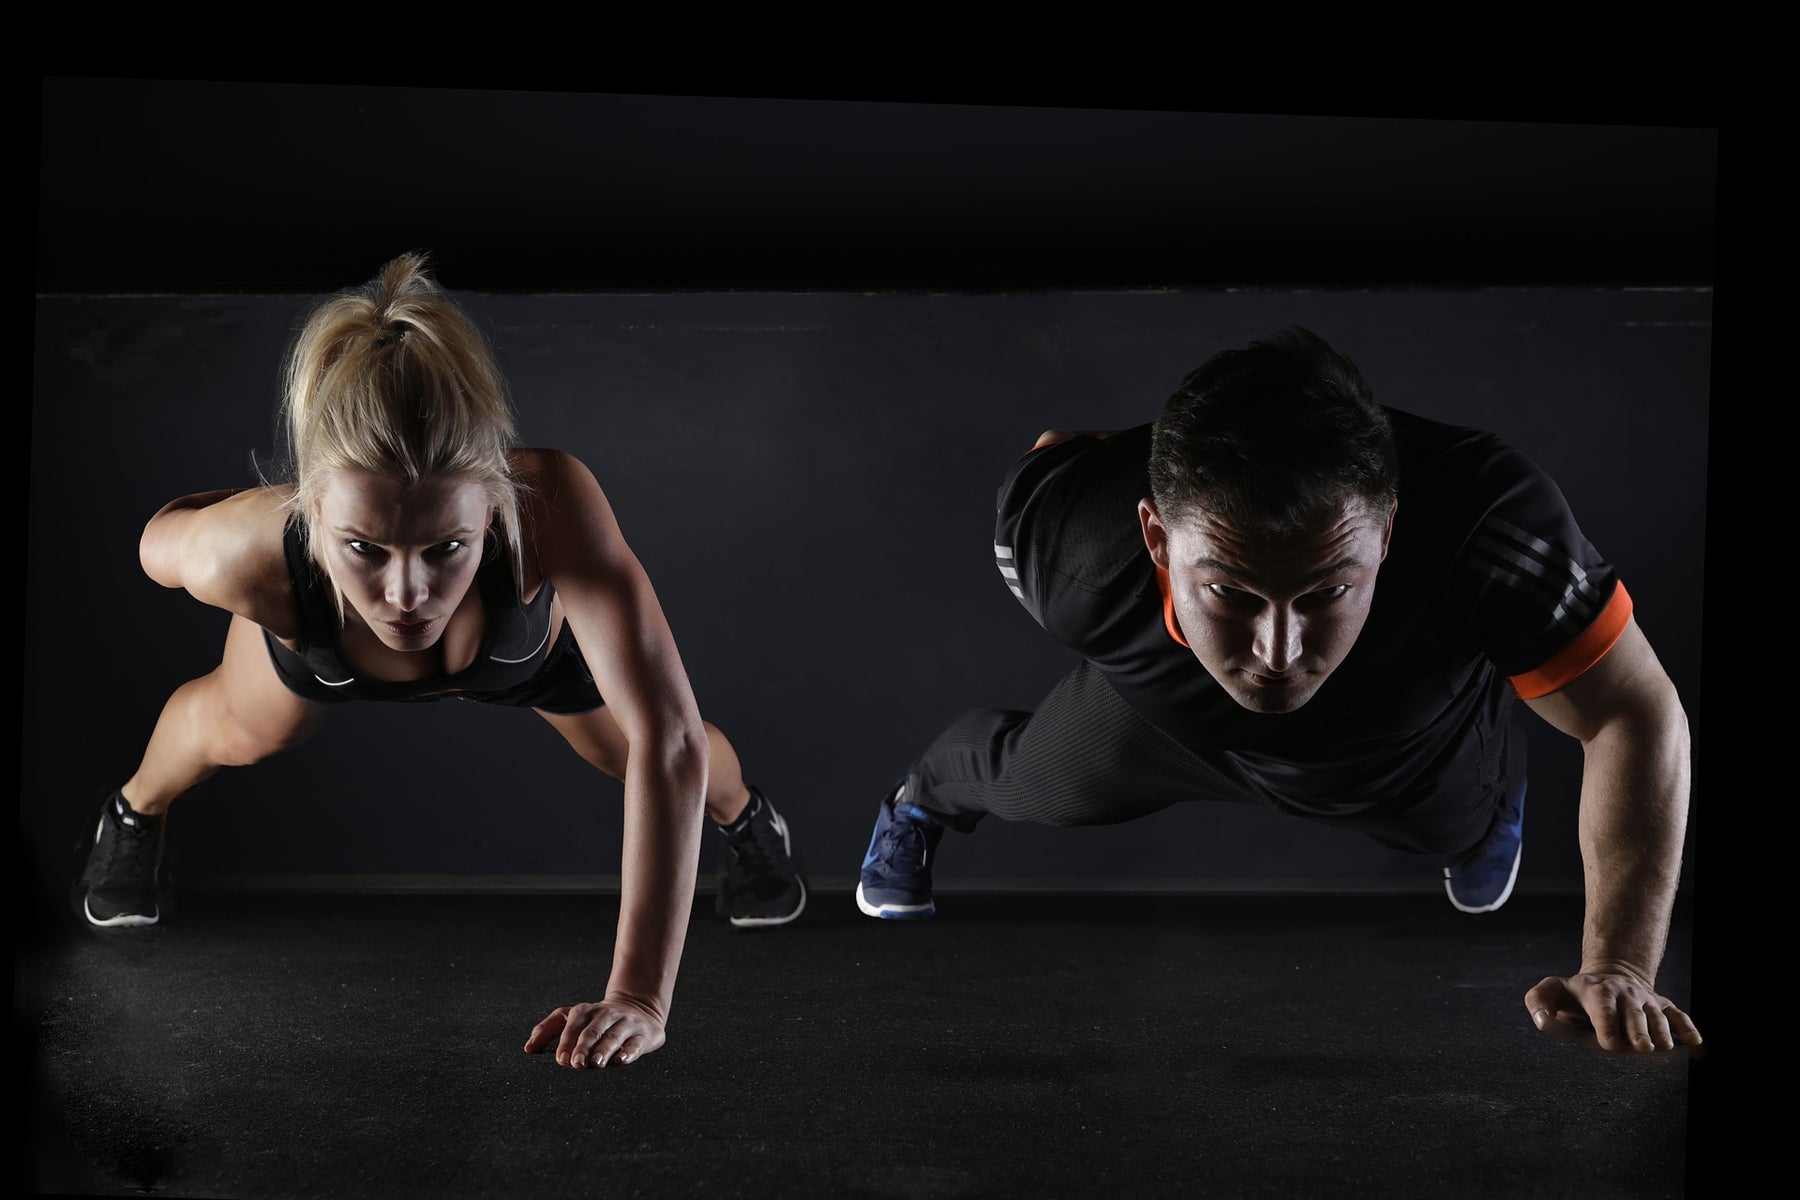 Woman and man doing a one-hand pushup in a black room